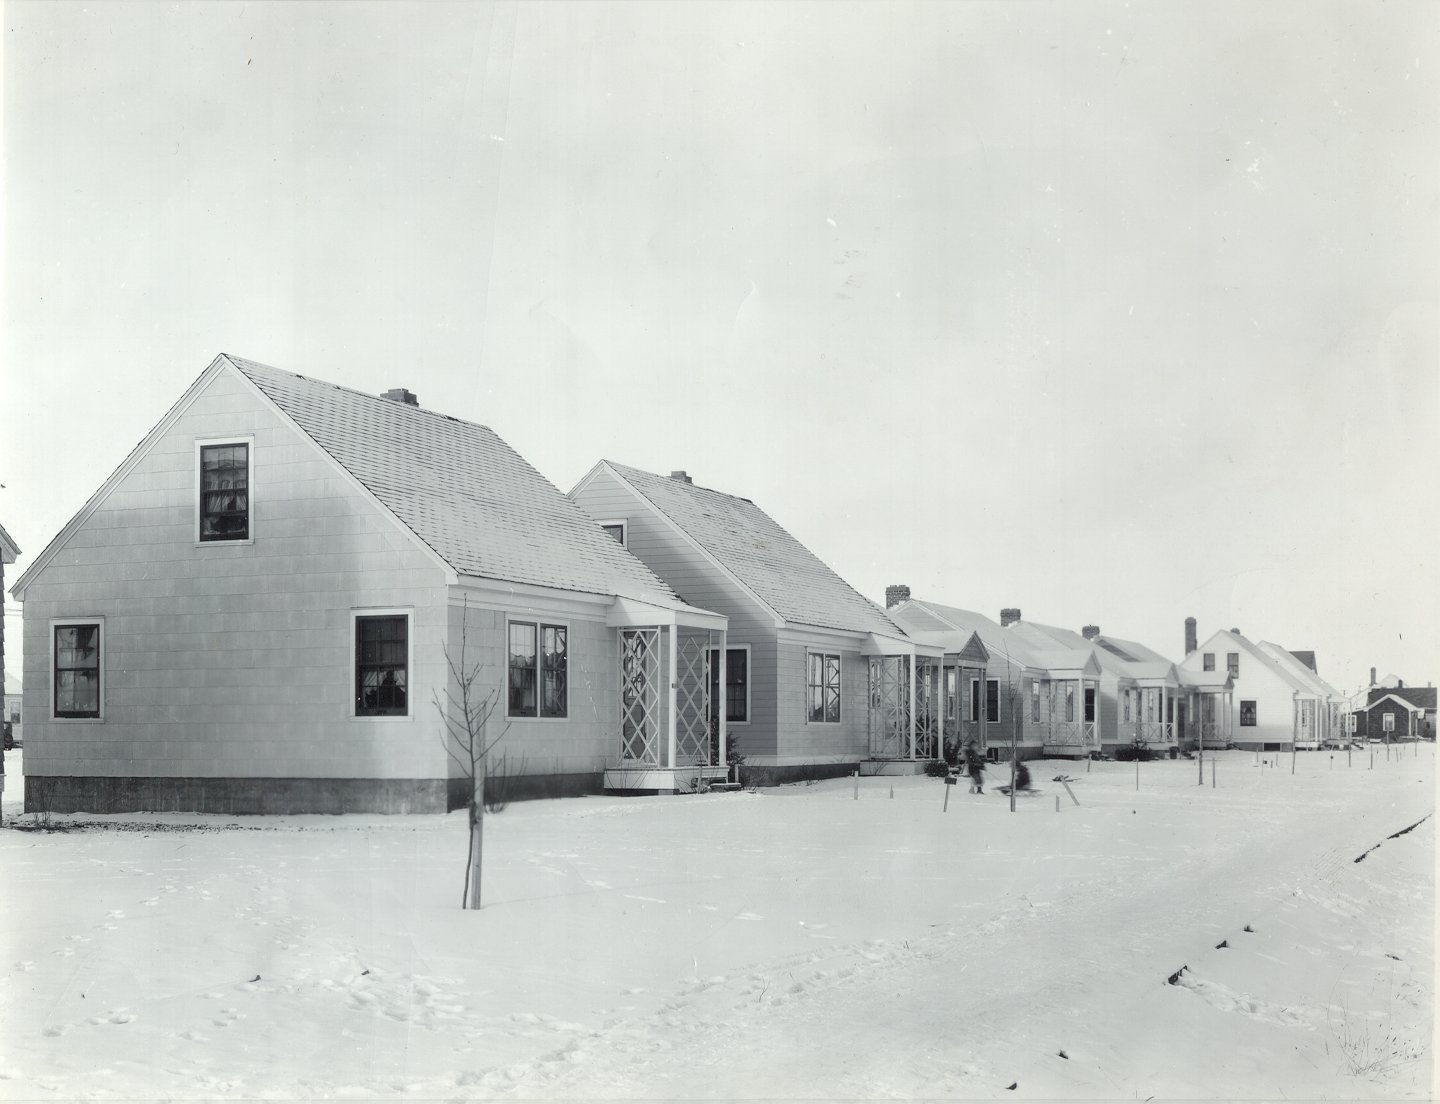 http://scaa.usask.ca/gallery/war/images/wartime_houses.jpg